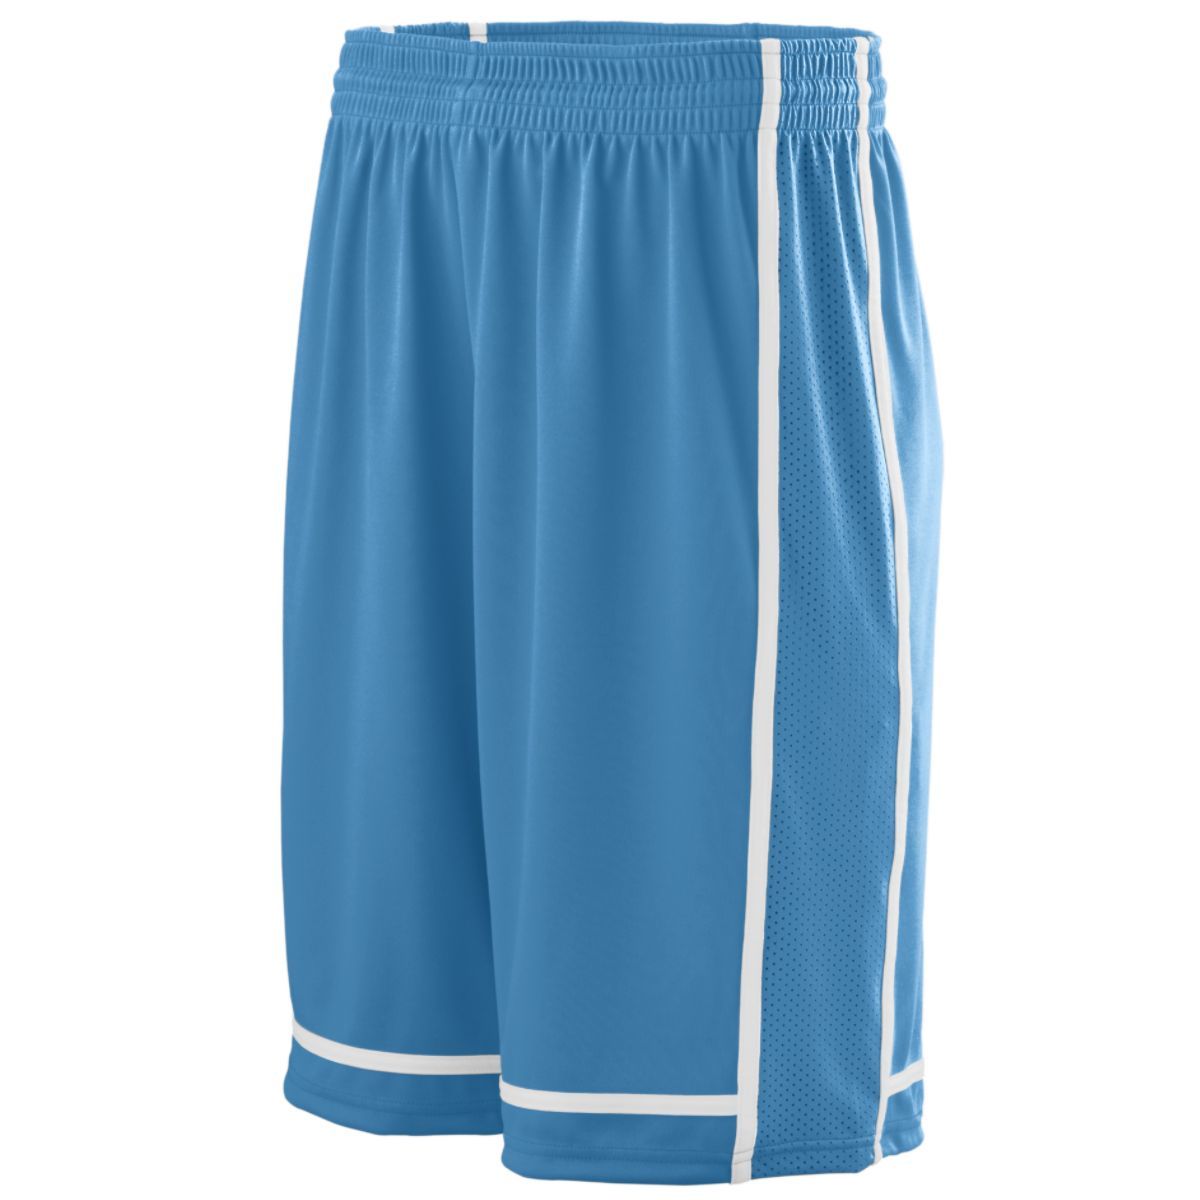 Augusta Sportswear Winning Streak Shorts in Columbia Blue/White  -Part of the Adult, Adult-Shorts, Augusta-Products, Basketball, All-Sports, All-Sports-1 product lines at KanaleyCreations.com